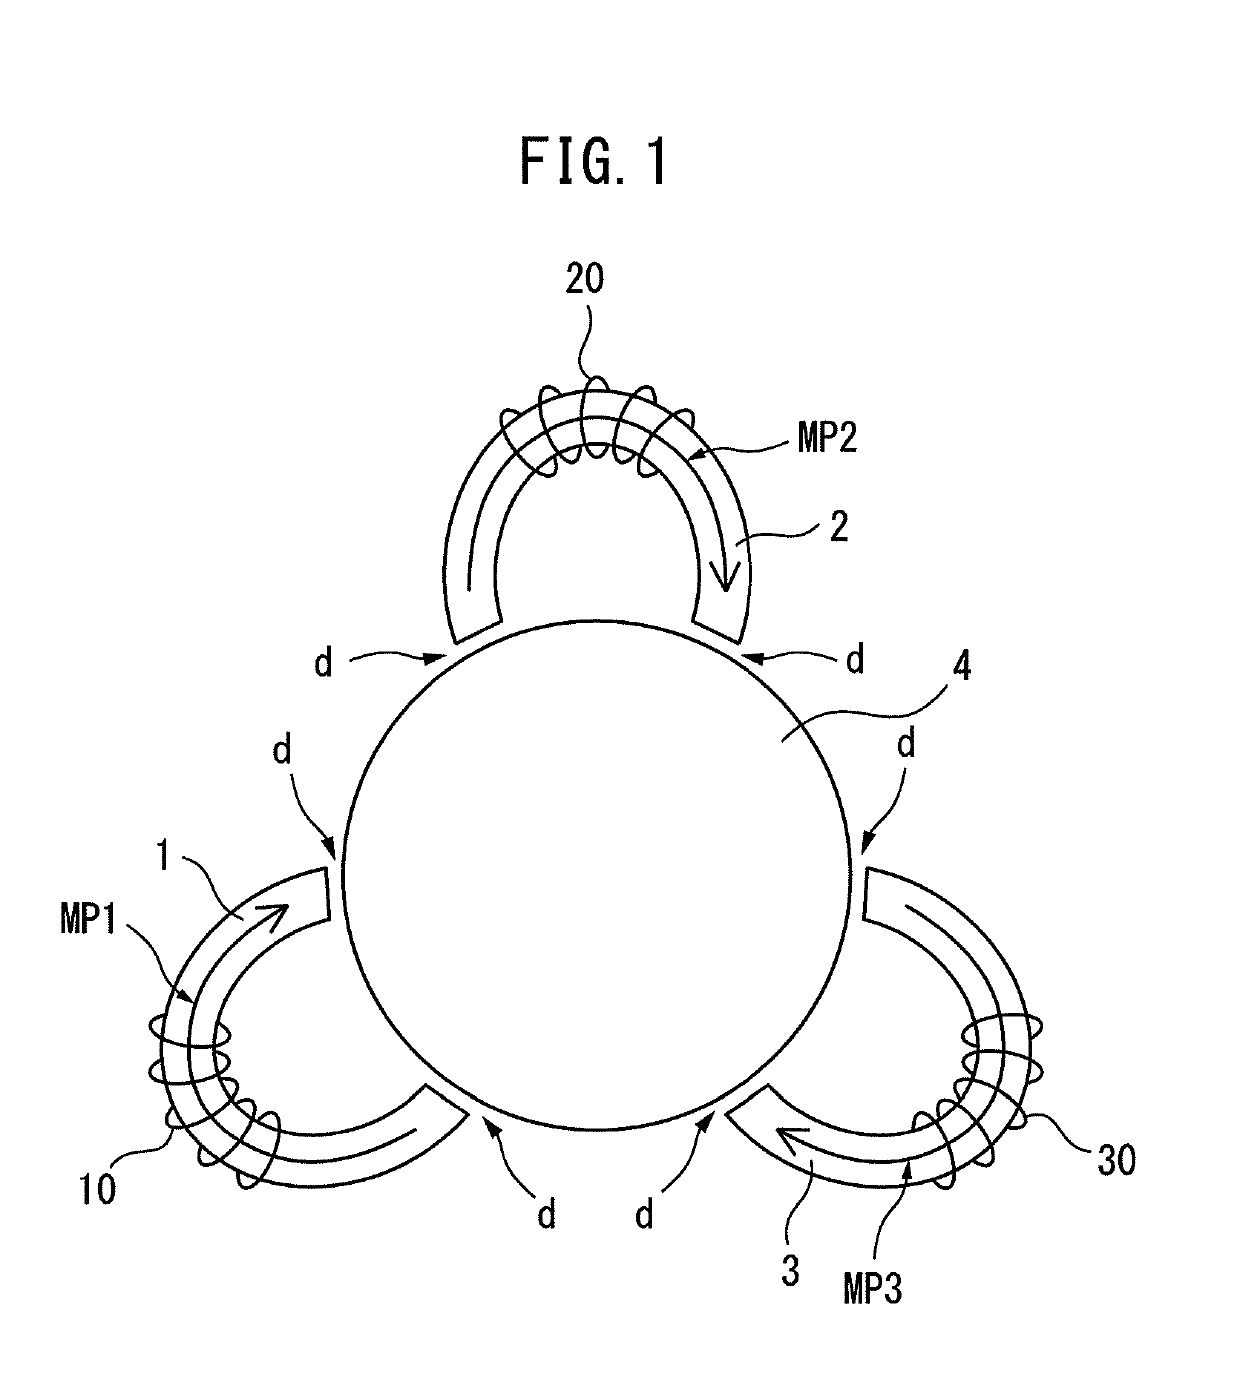 Multi-phase reactor capable of obtaining constant inductance for each phase